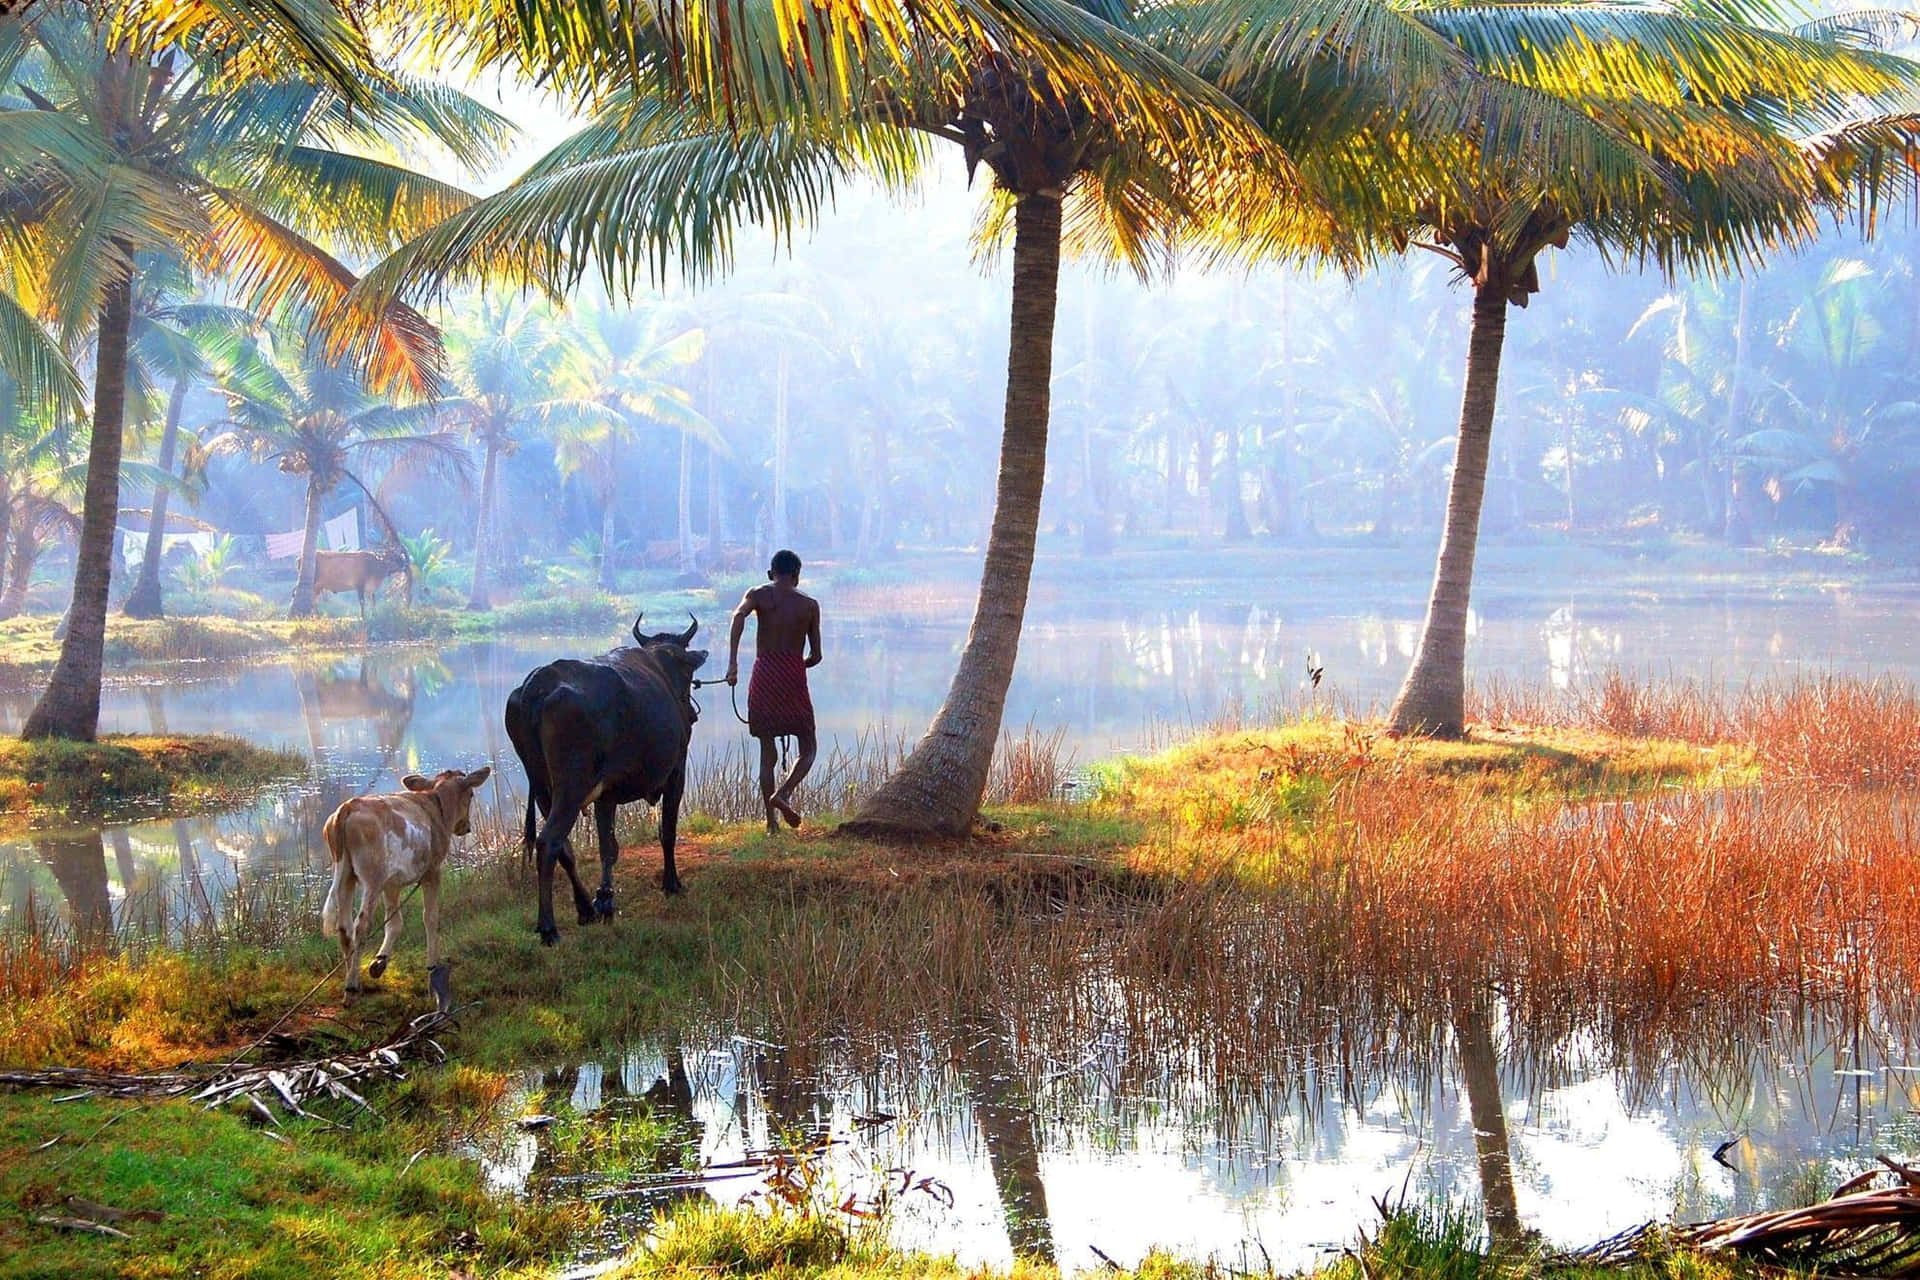 Reflection of God's Own Country, Kerala